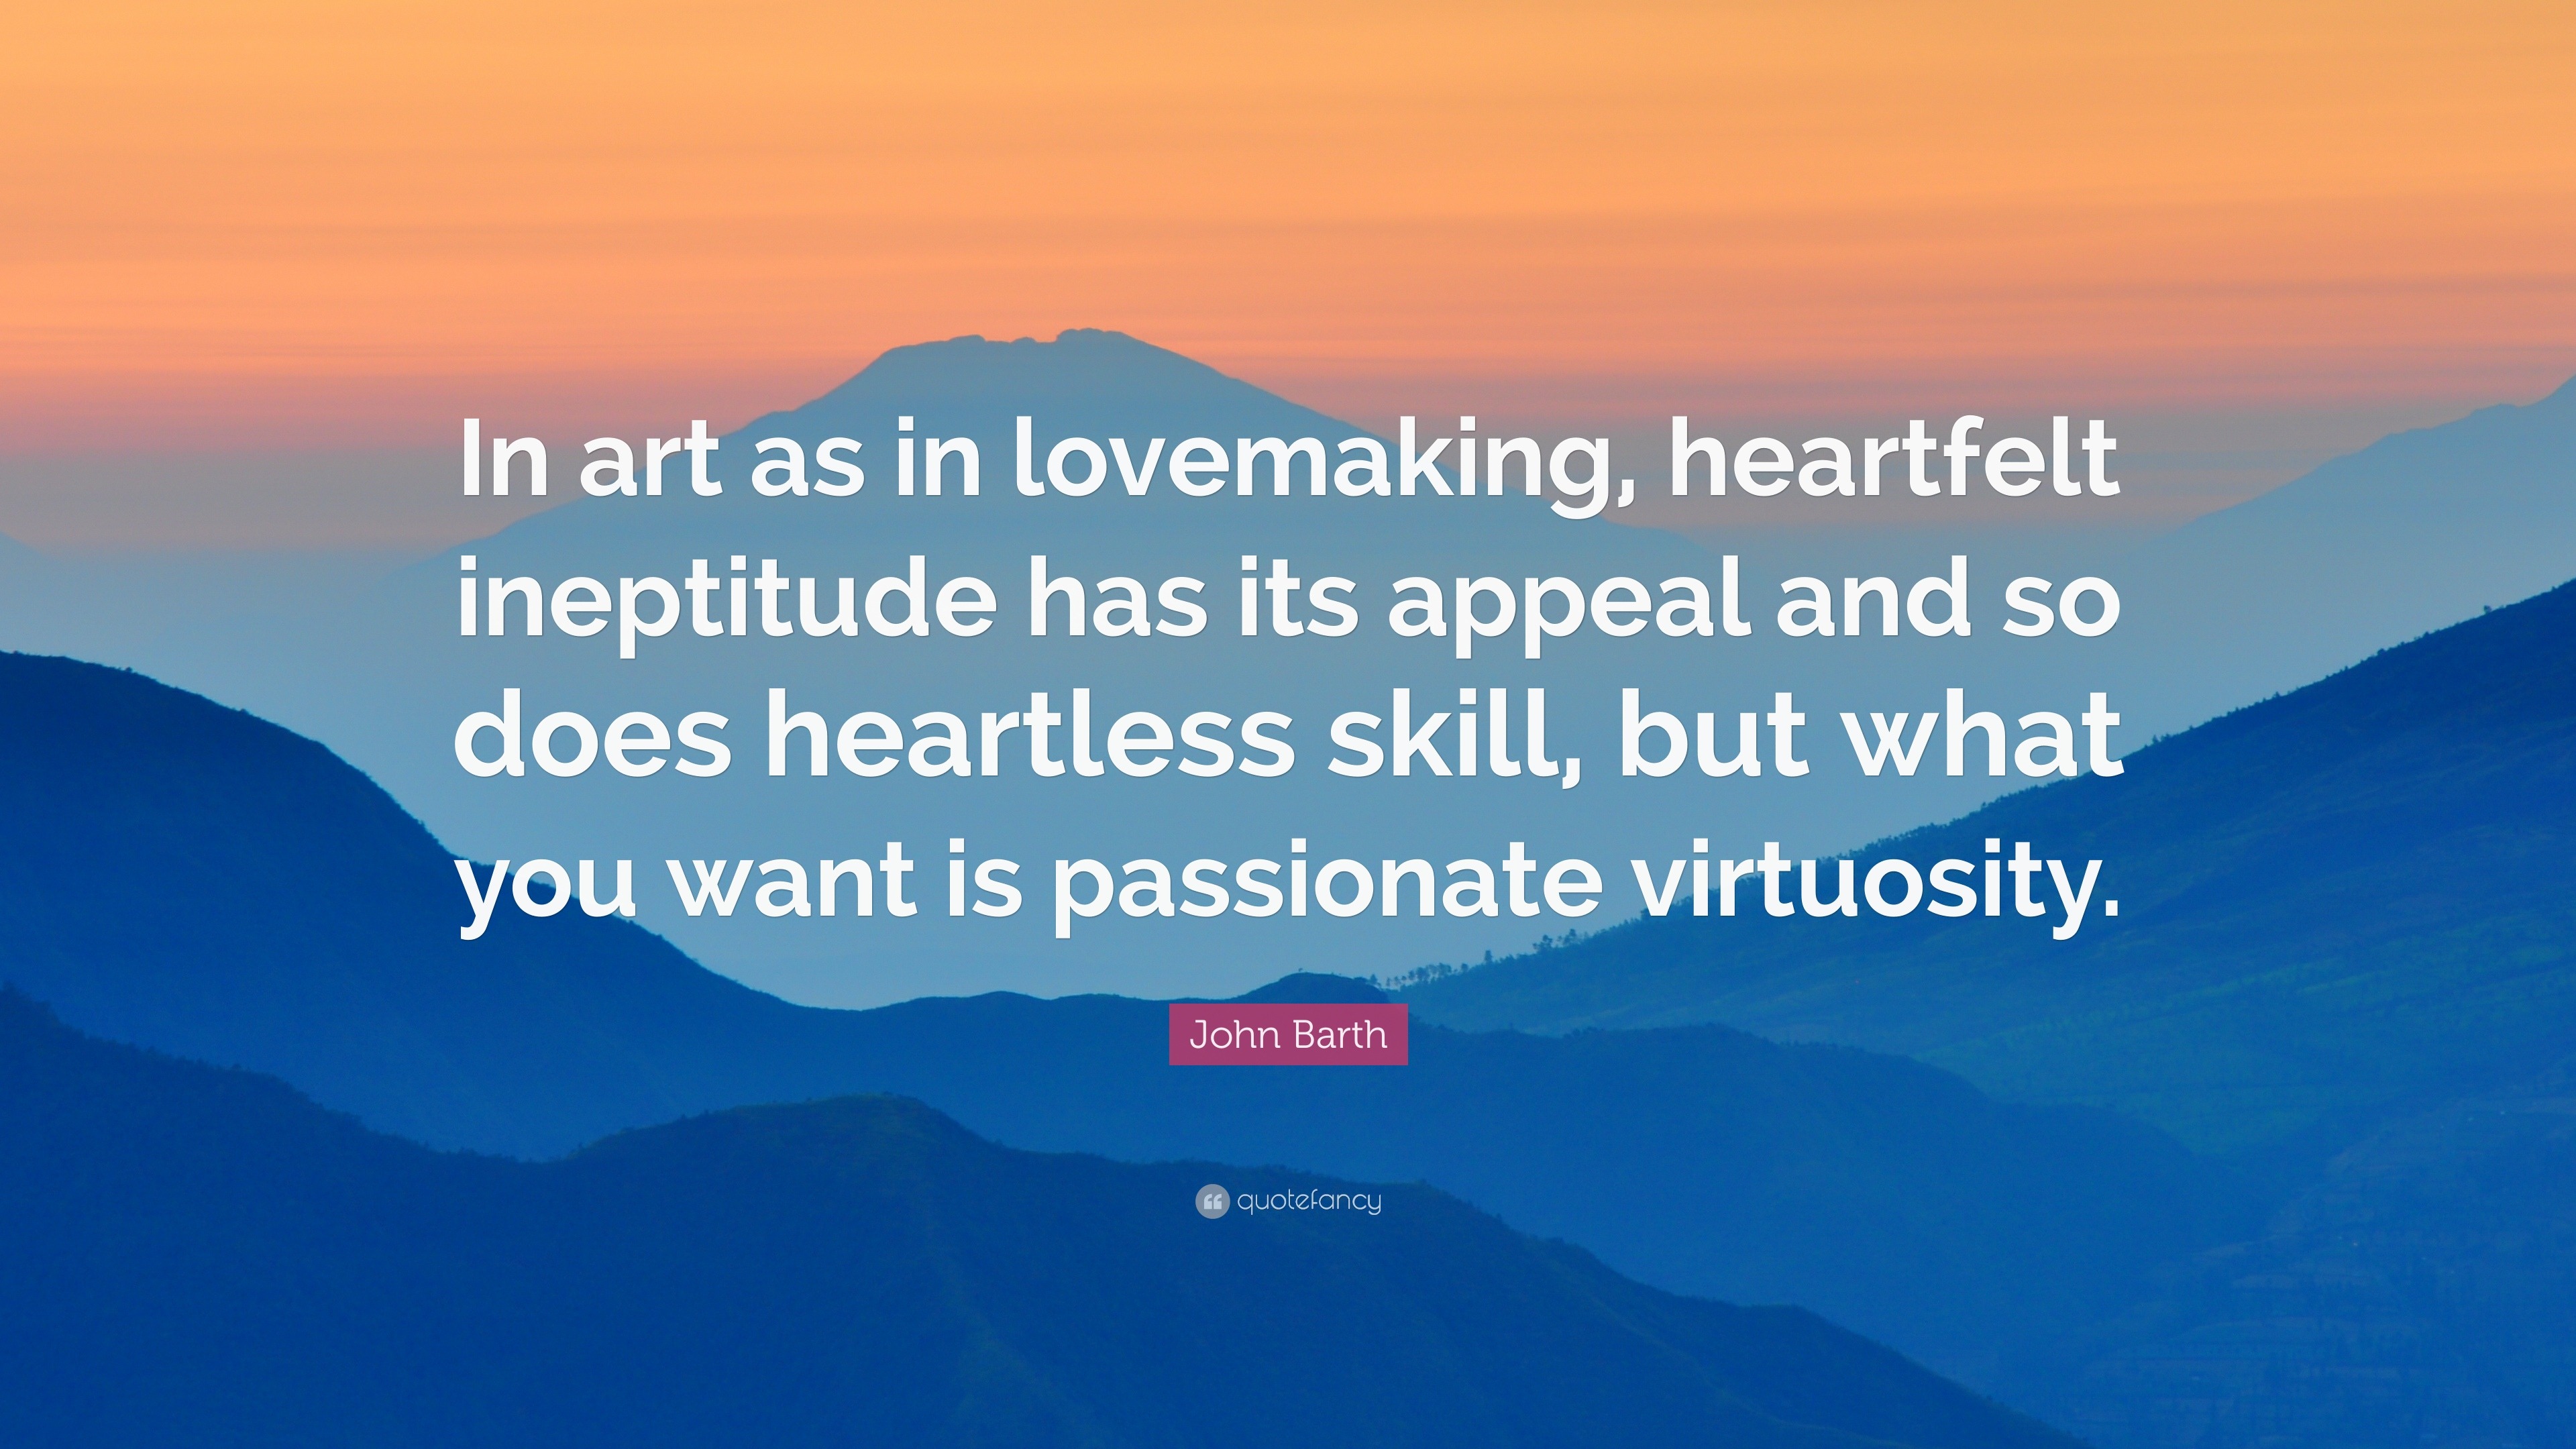 John Barth Quote “In art as in lovemaking heartfelt ineptitude has its appeal